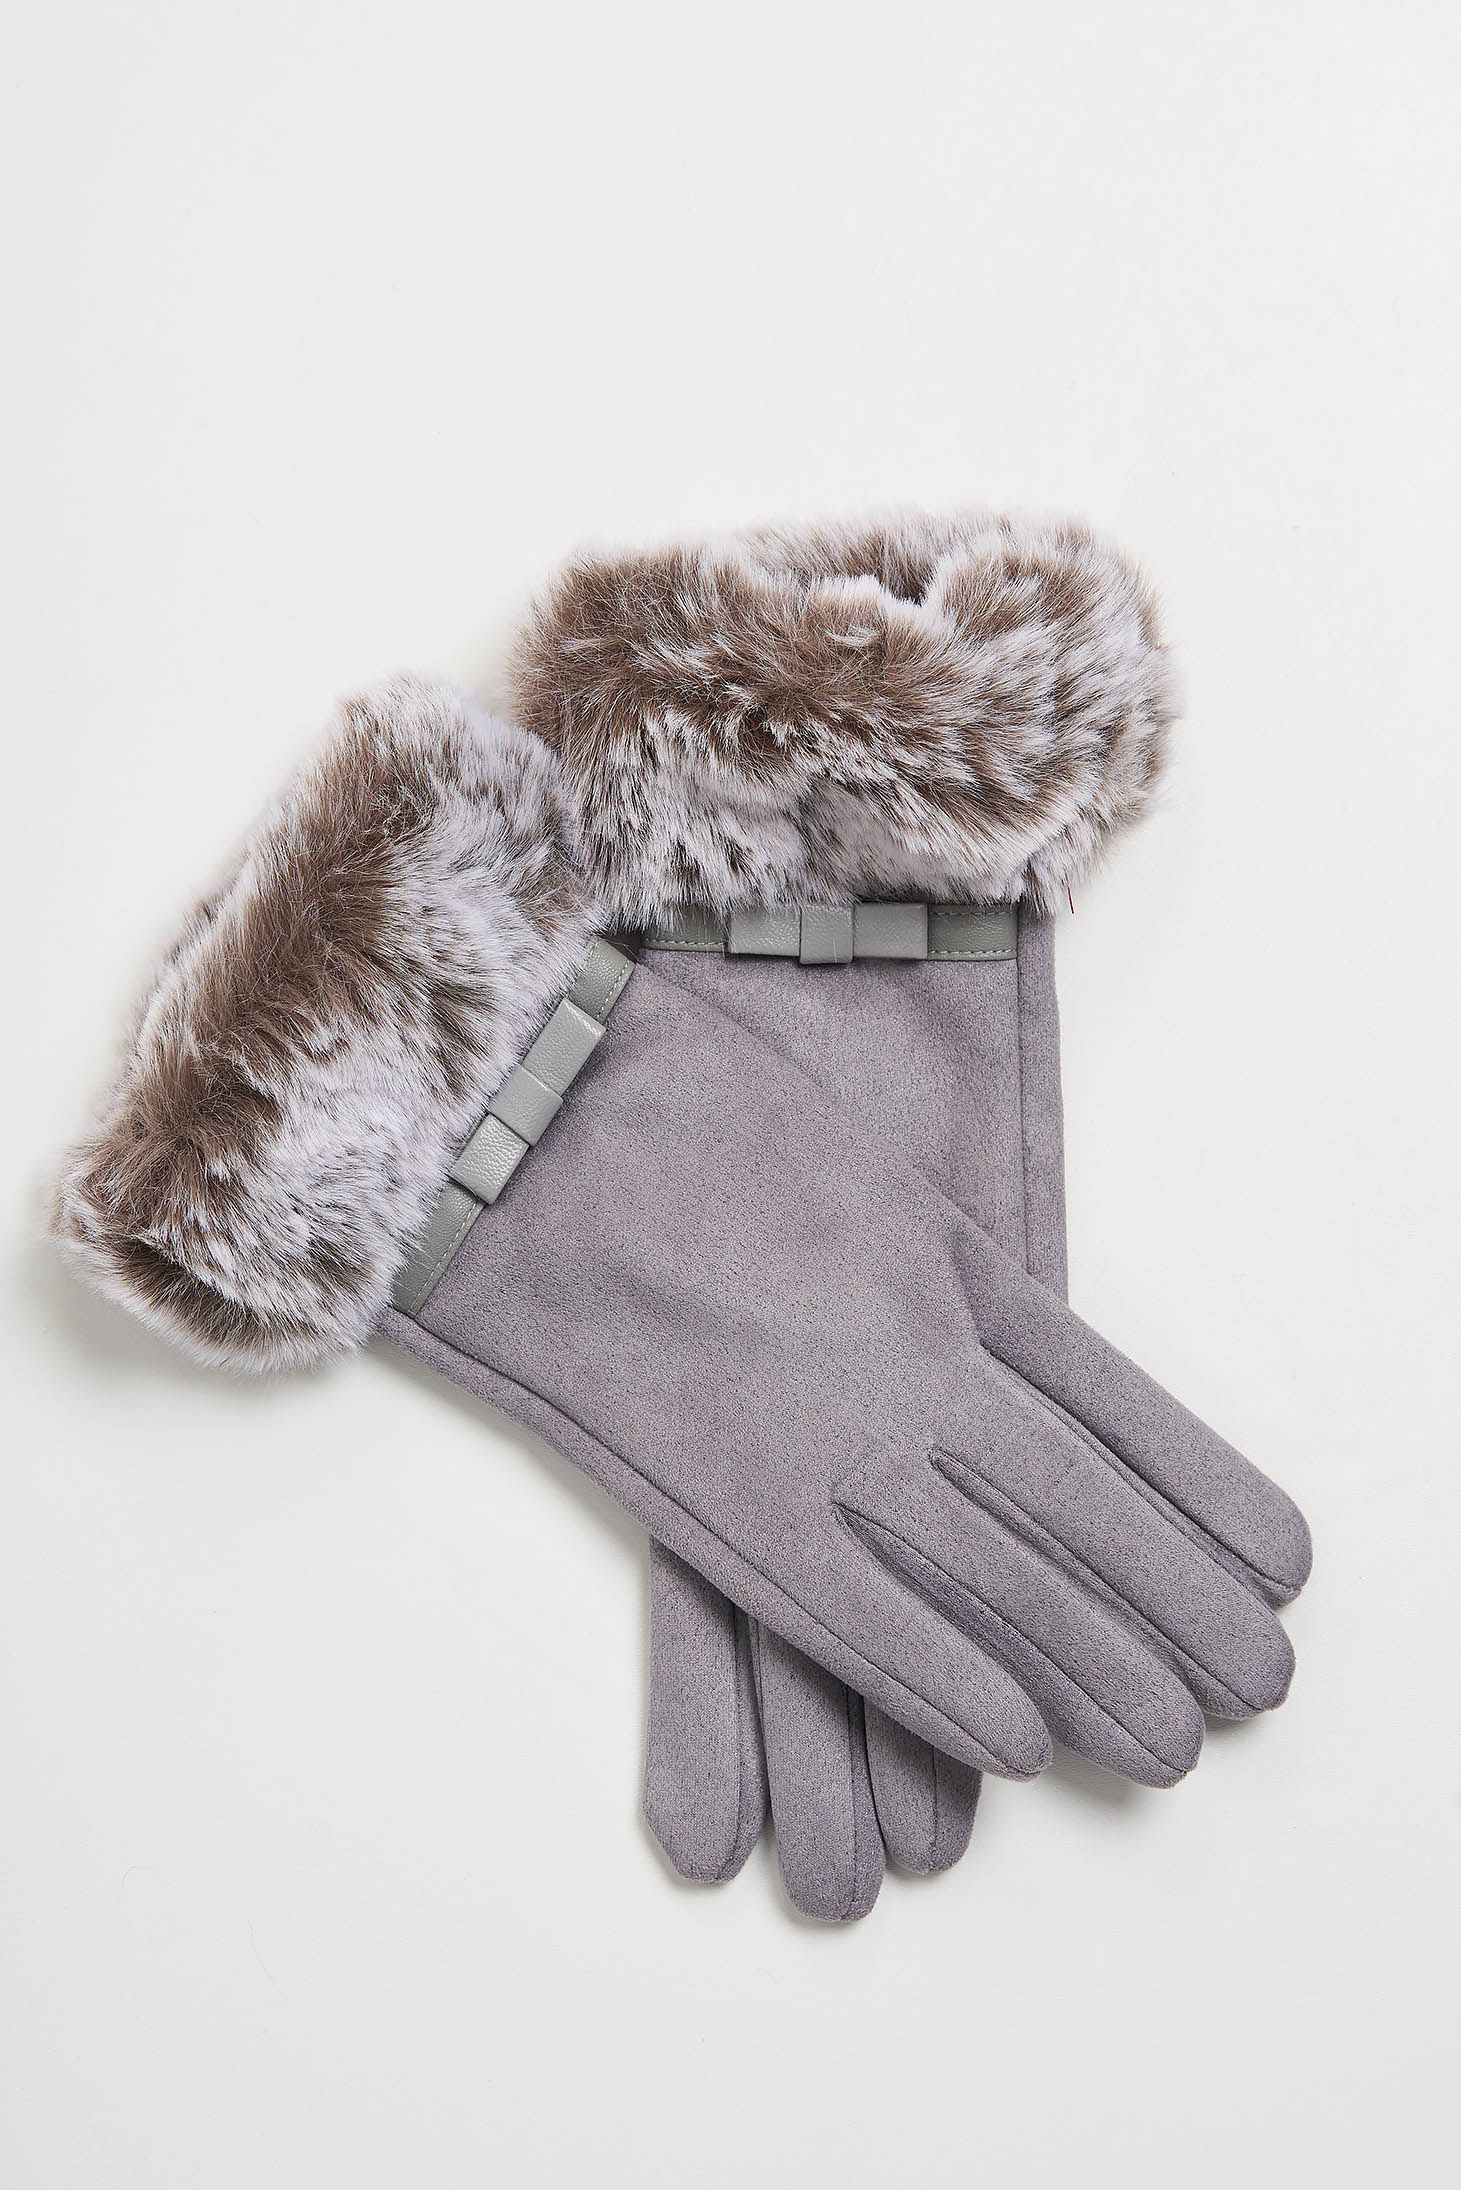 Grey gloves from ecological leather with faux fur accessory